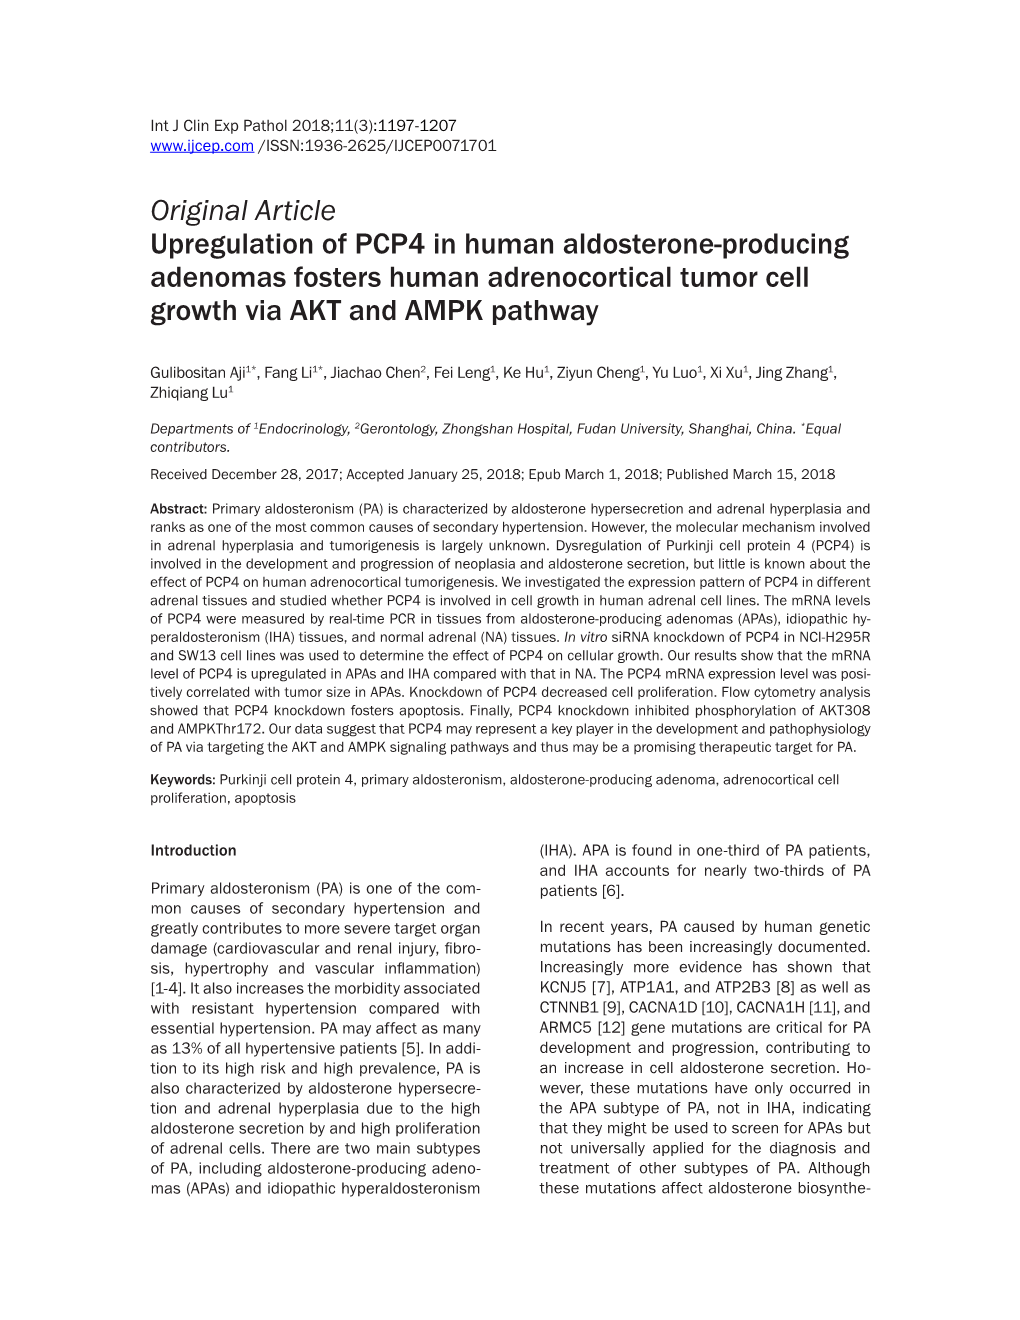 Original Article Upregulation of PCP4 in Human Aldosterone-Producing Adenomas Fosters Human Adrenocortical Tumor Cell Growth Via AKT and AMPK Pathway